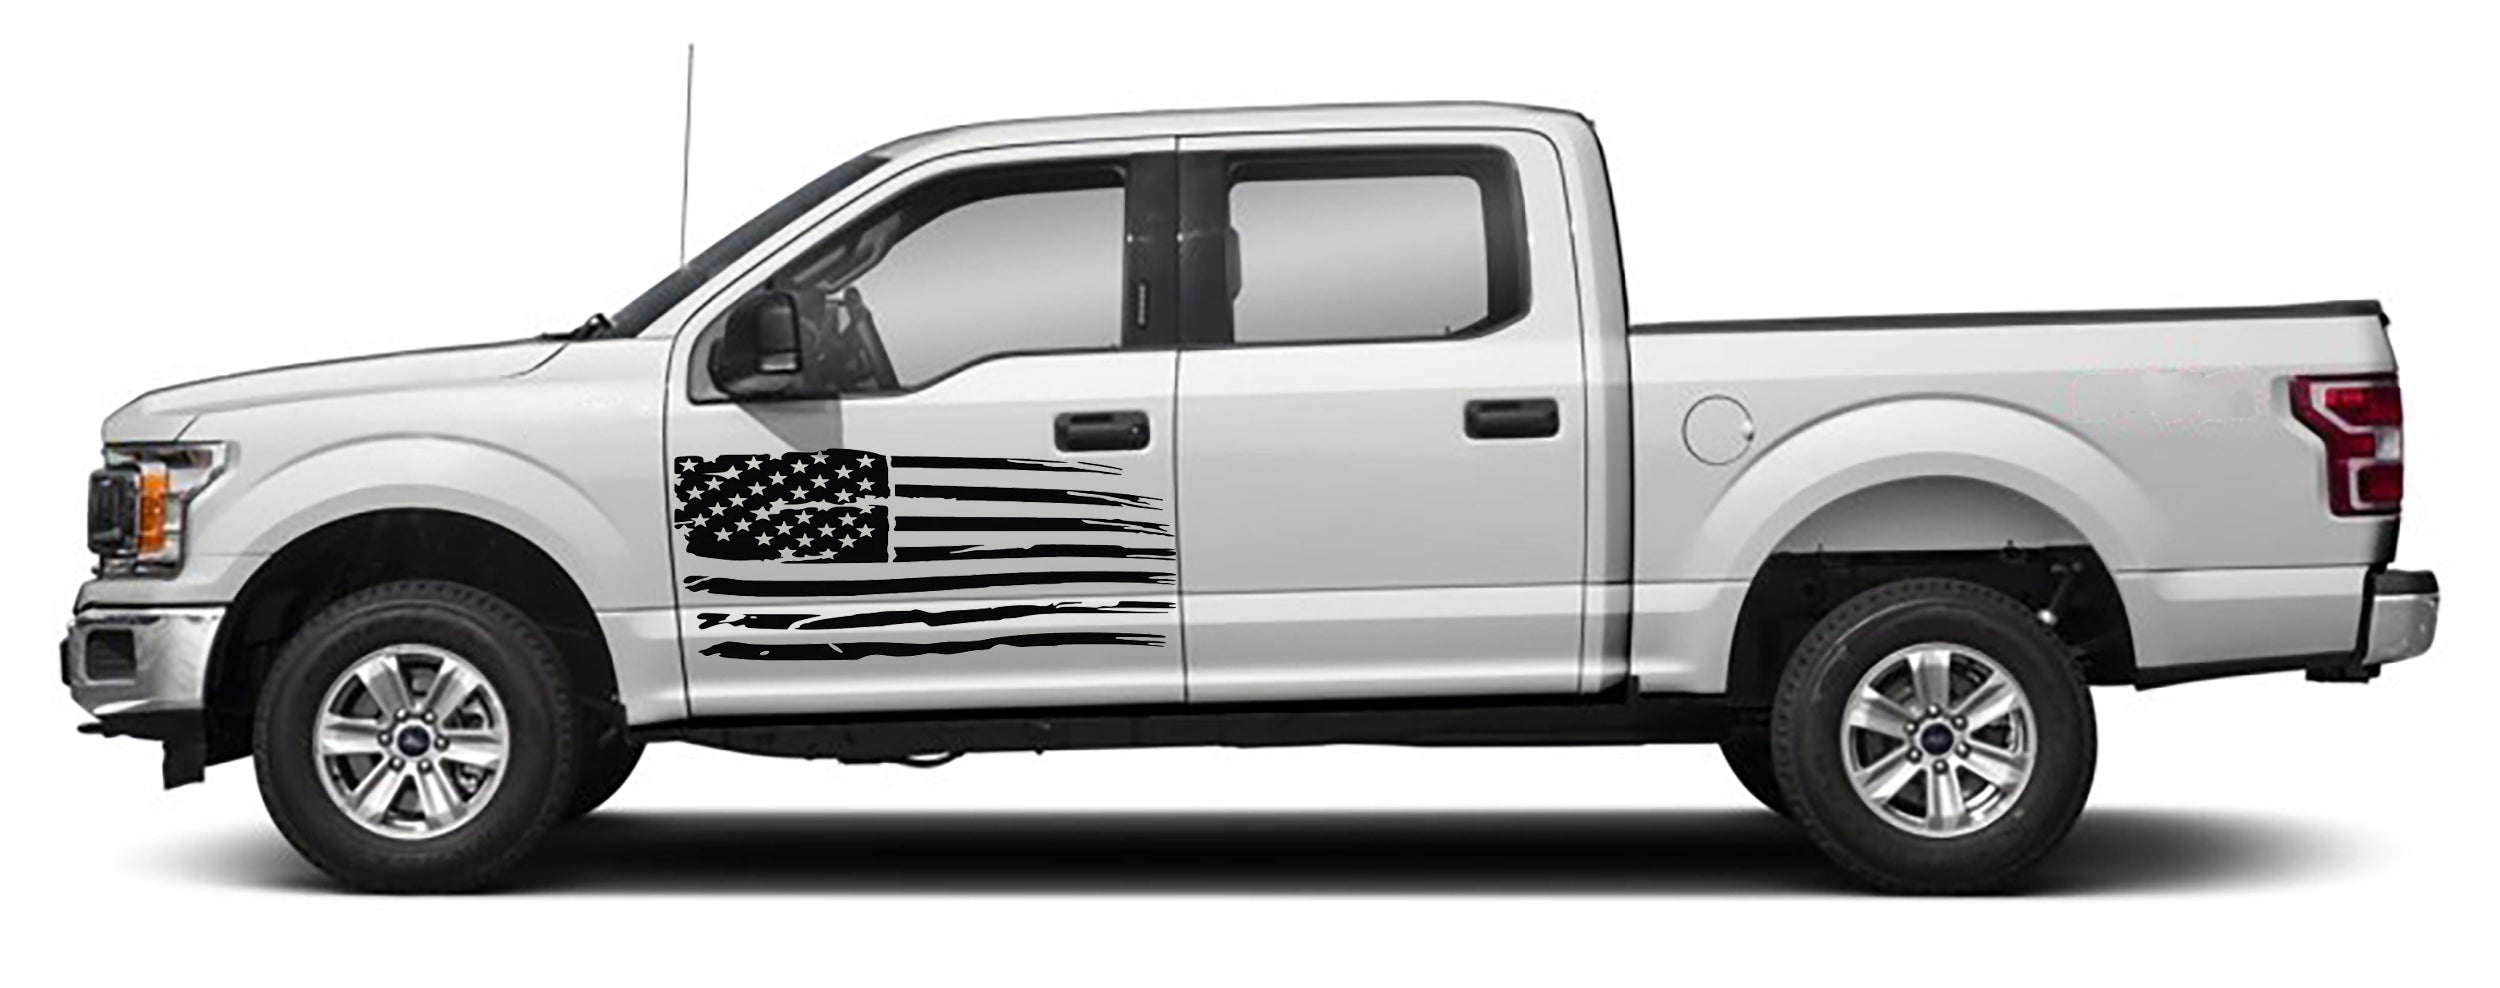 Ford F-150 USA Flag Door Decals (Pair) : Vinyl Graphics Kit Fits (2015-2020)